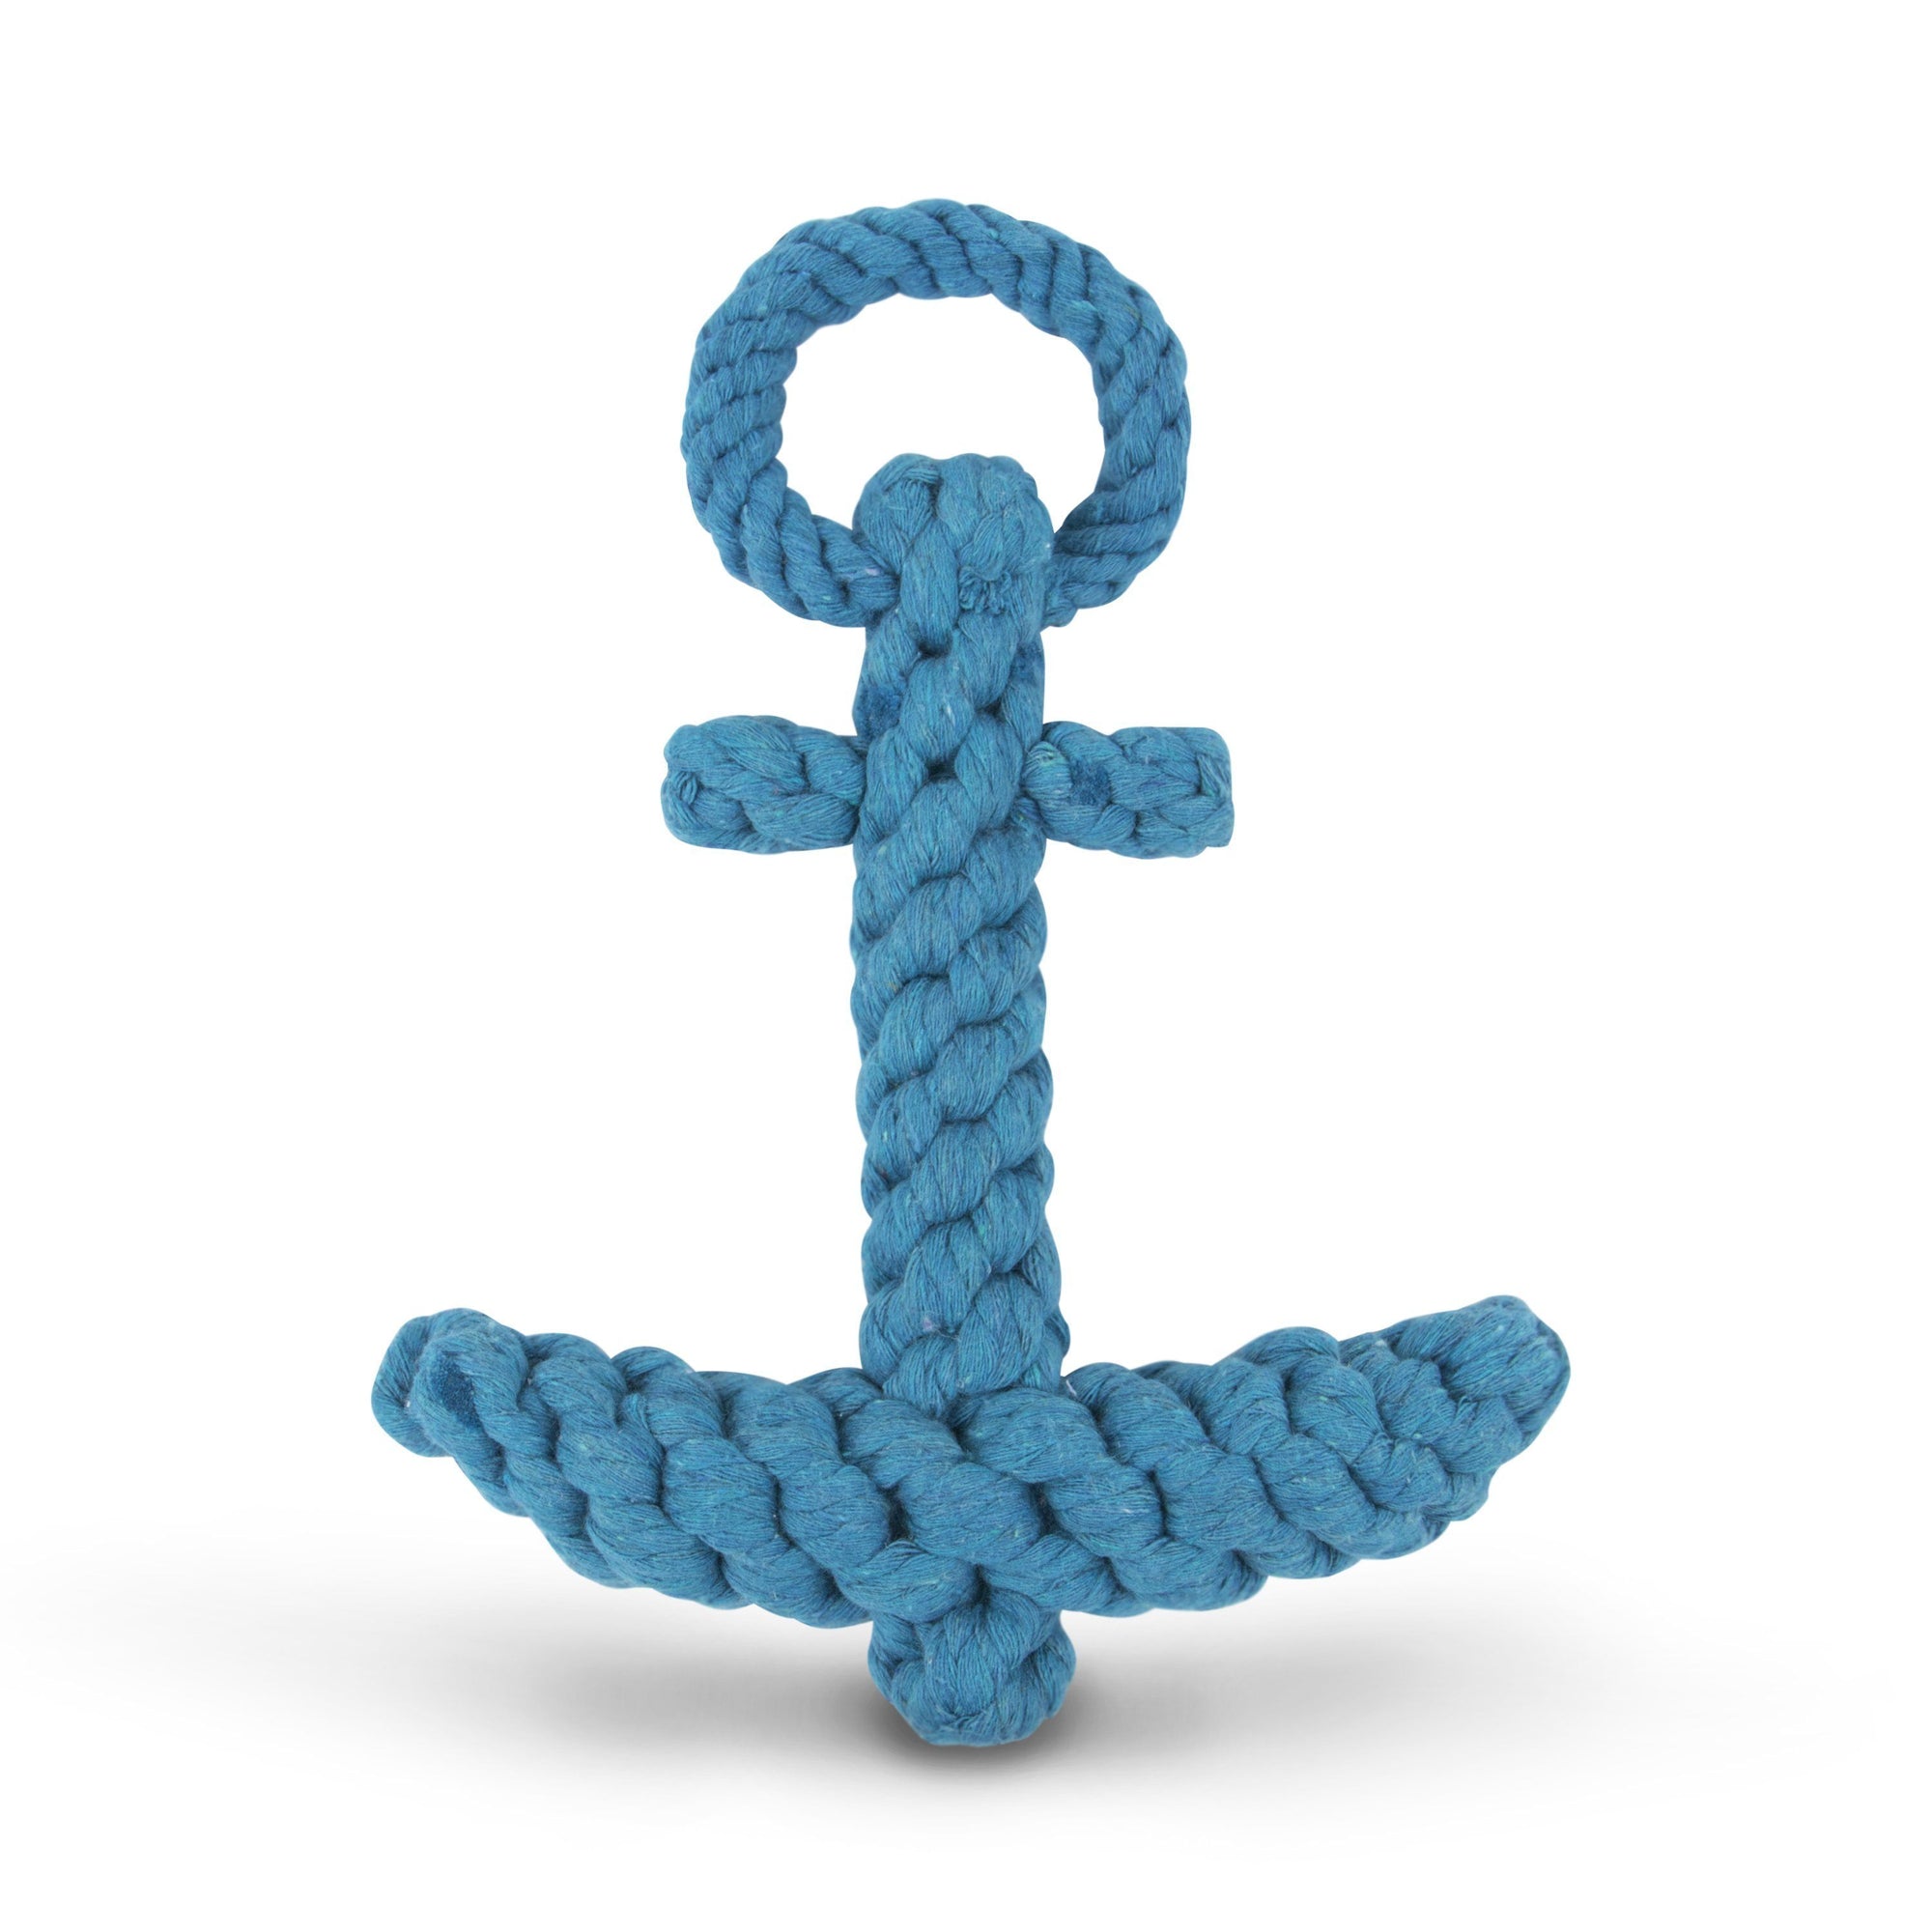 Rope Toy - Anchor-Knotted Cotton Rope Toy